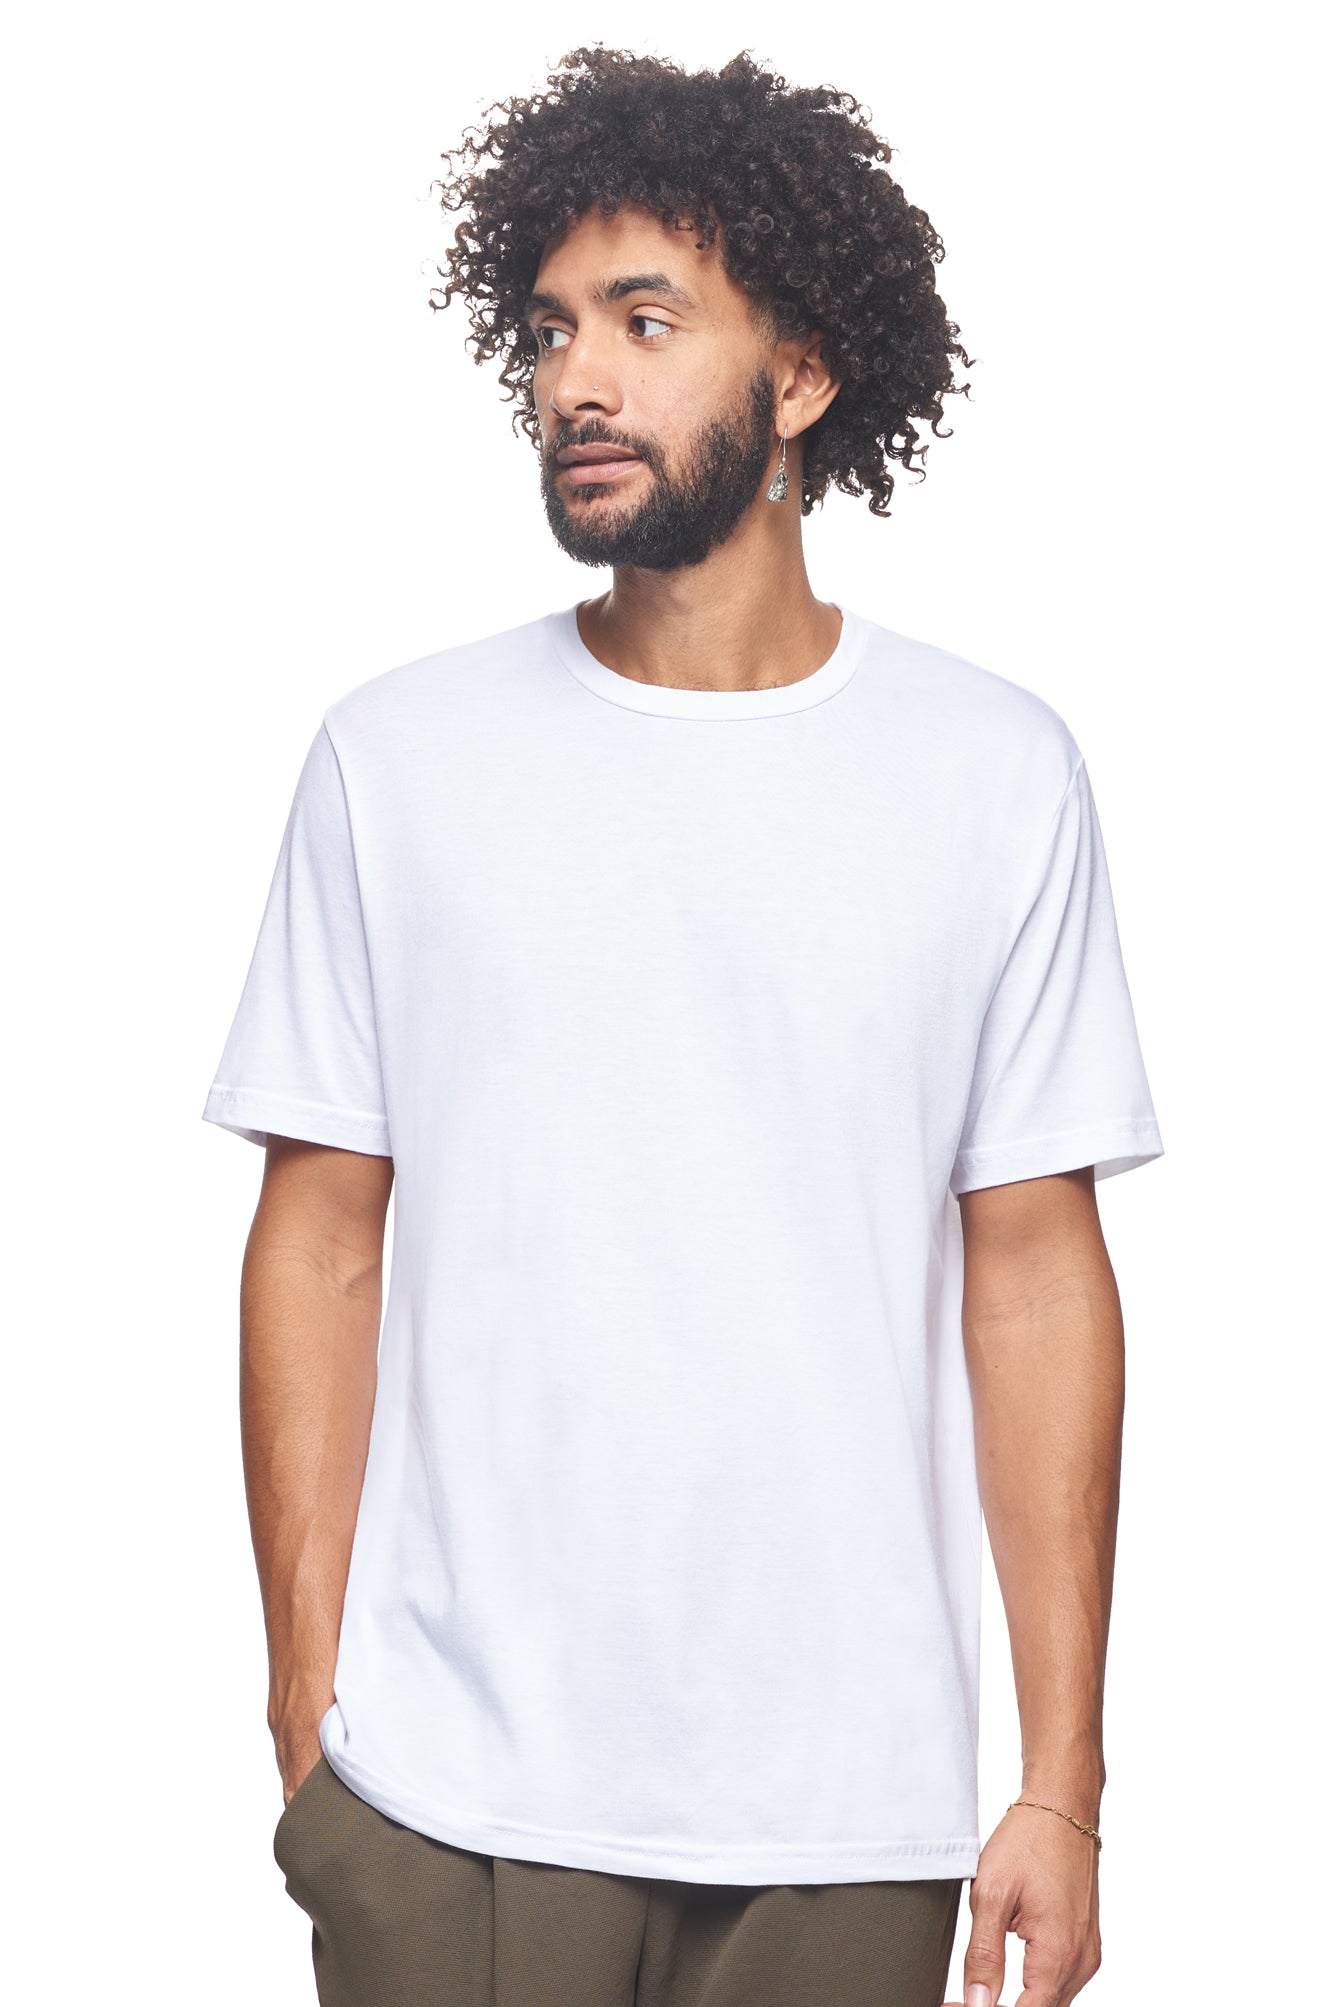 Expert Brand Retail Sustainable Eco-Friendly Hemp Organic Cotton Men's crewneck T-Shirt Made in the USA white#color_white